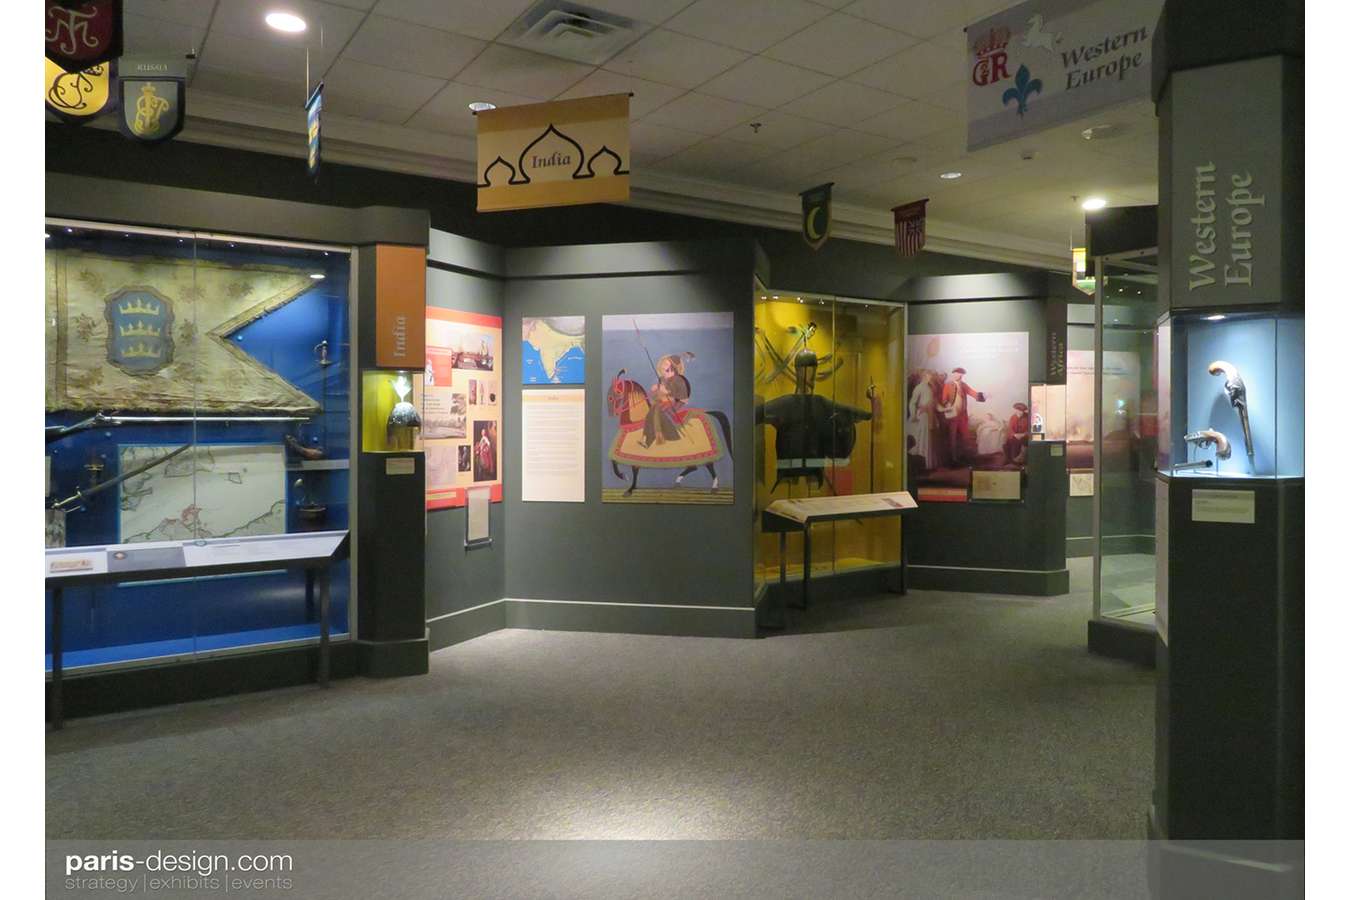 4W 7yrs 2 : Each thematic zone in this gallery has coordinated colors, logos, banners, flags, maps, and graphics